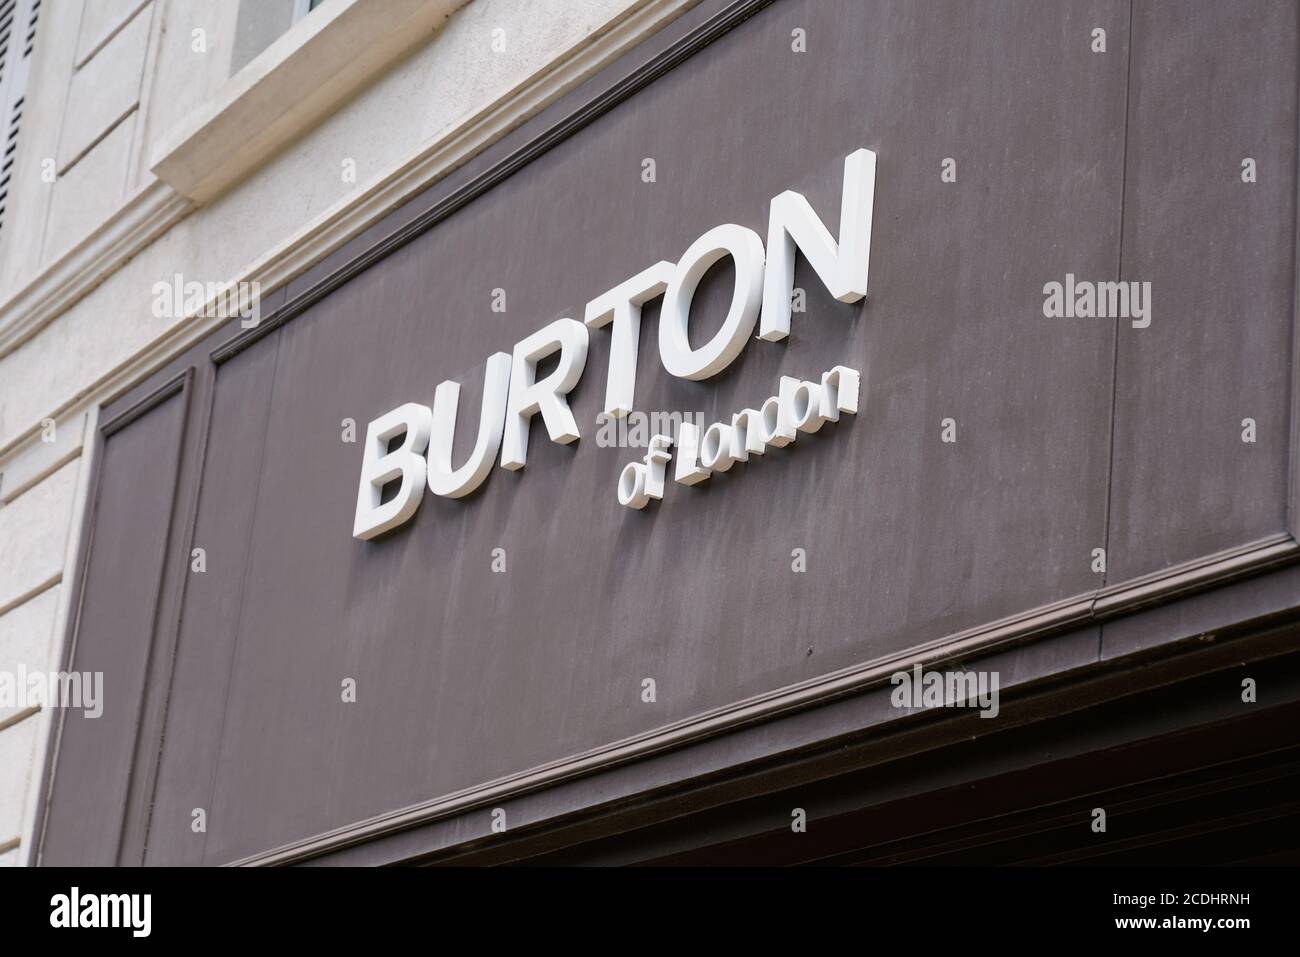 Burton Shop Front High Resolution Stock Photography and Images - Alamy